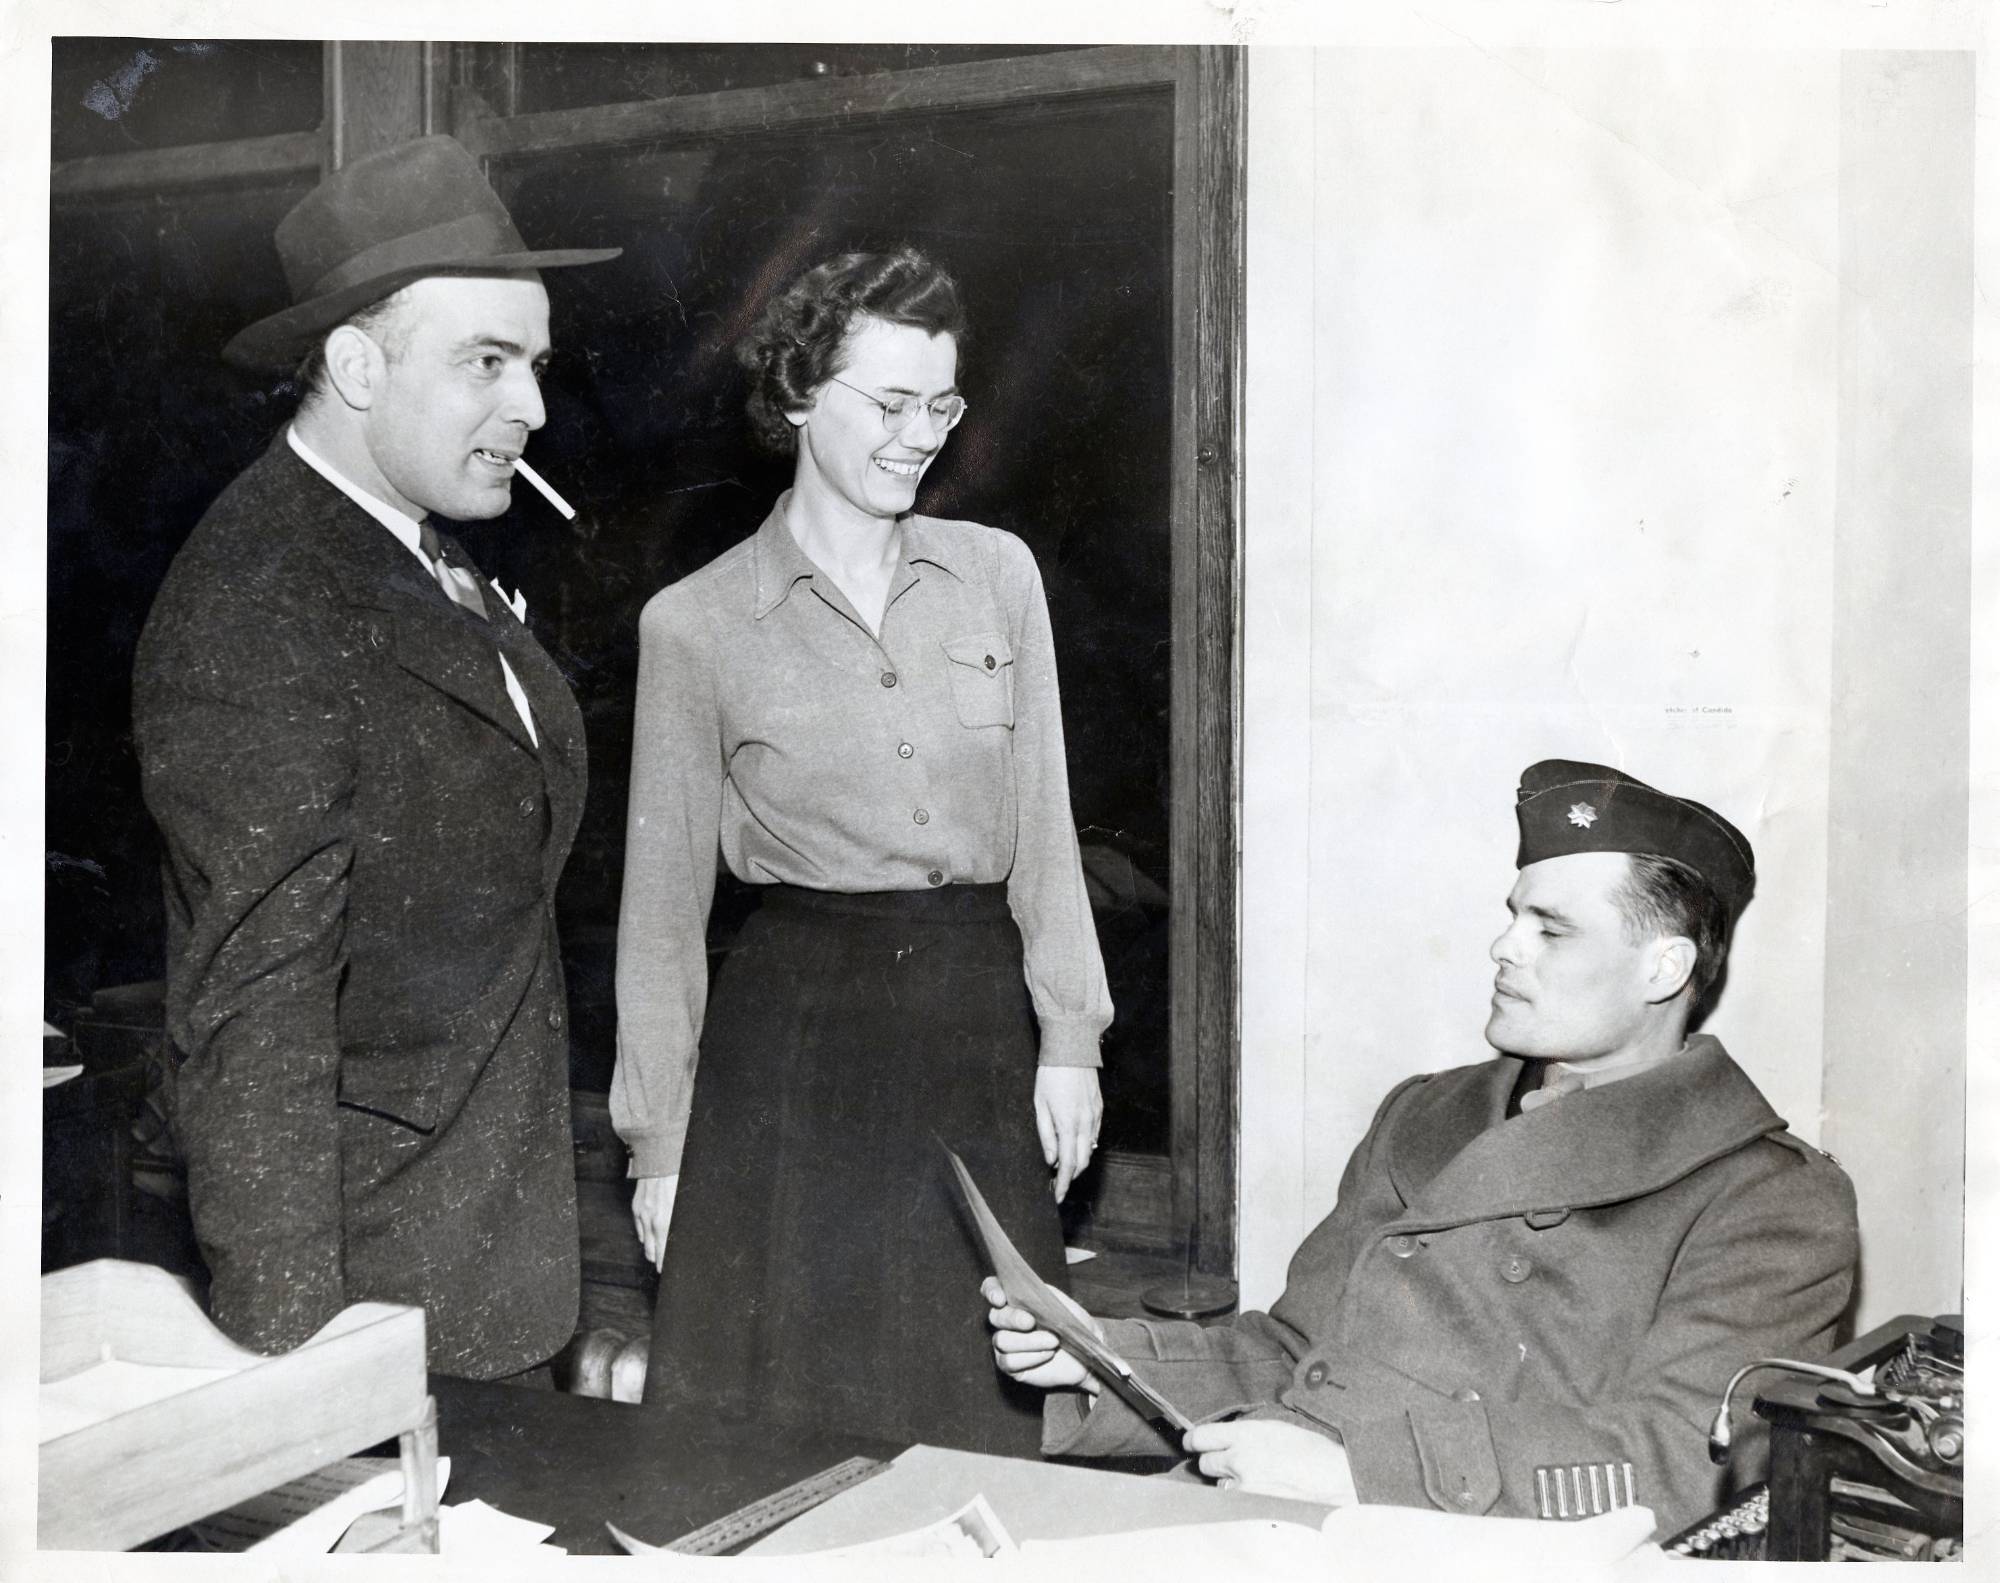 Ralph Hauenstein working with a female and a male military personal